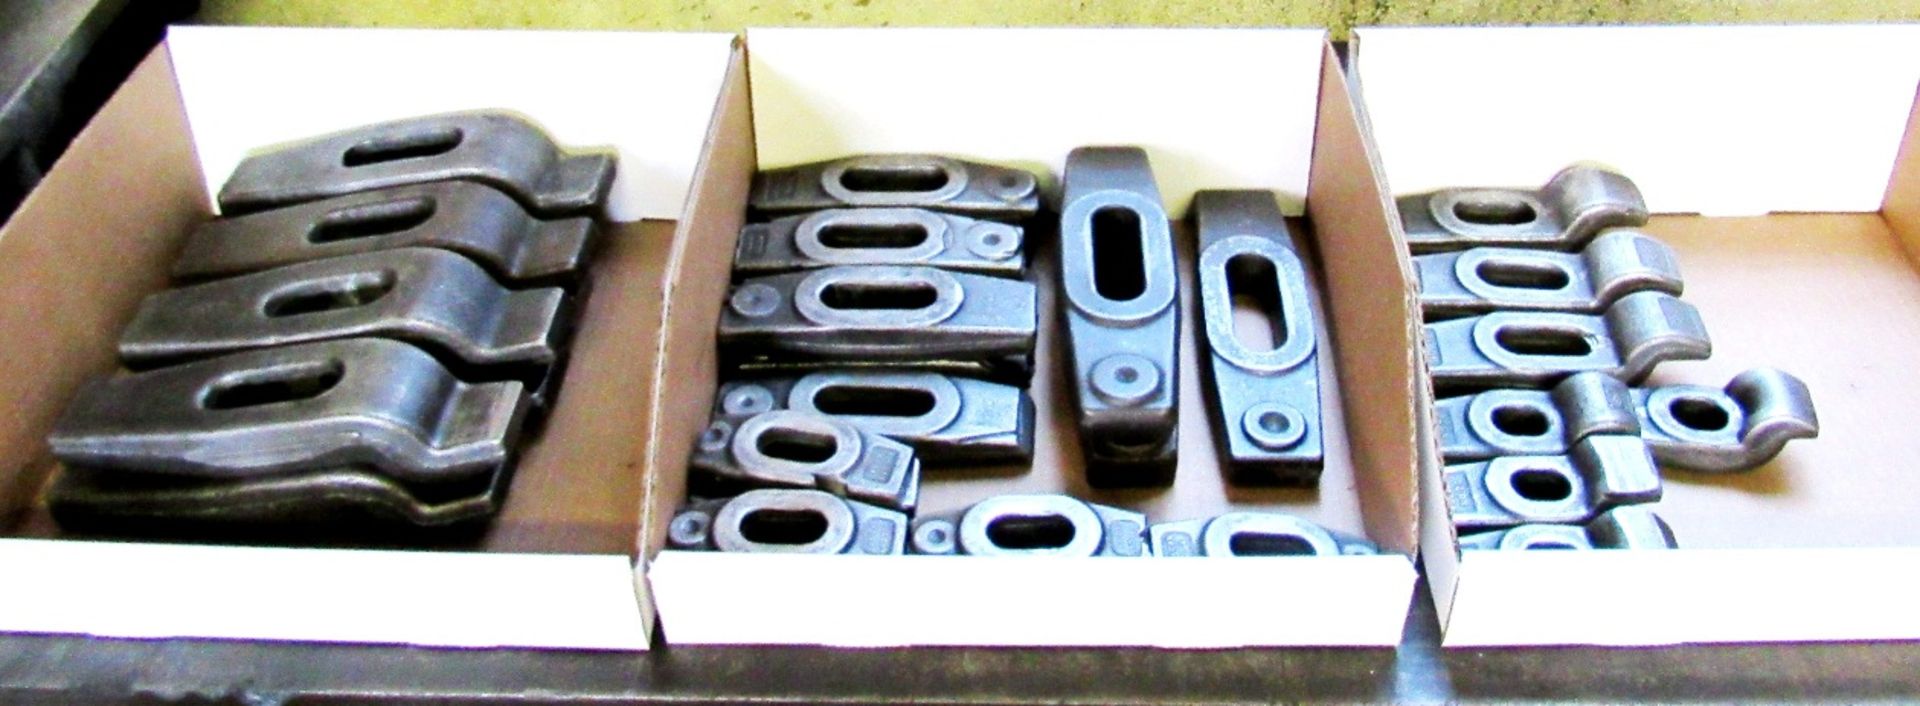 Approx. 32 Vulcan Hold Down Clamps